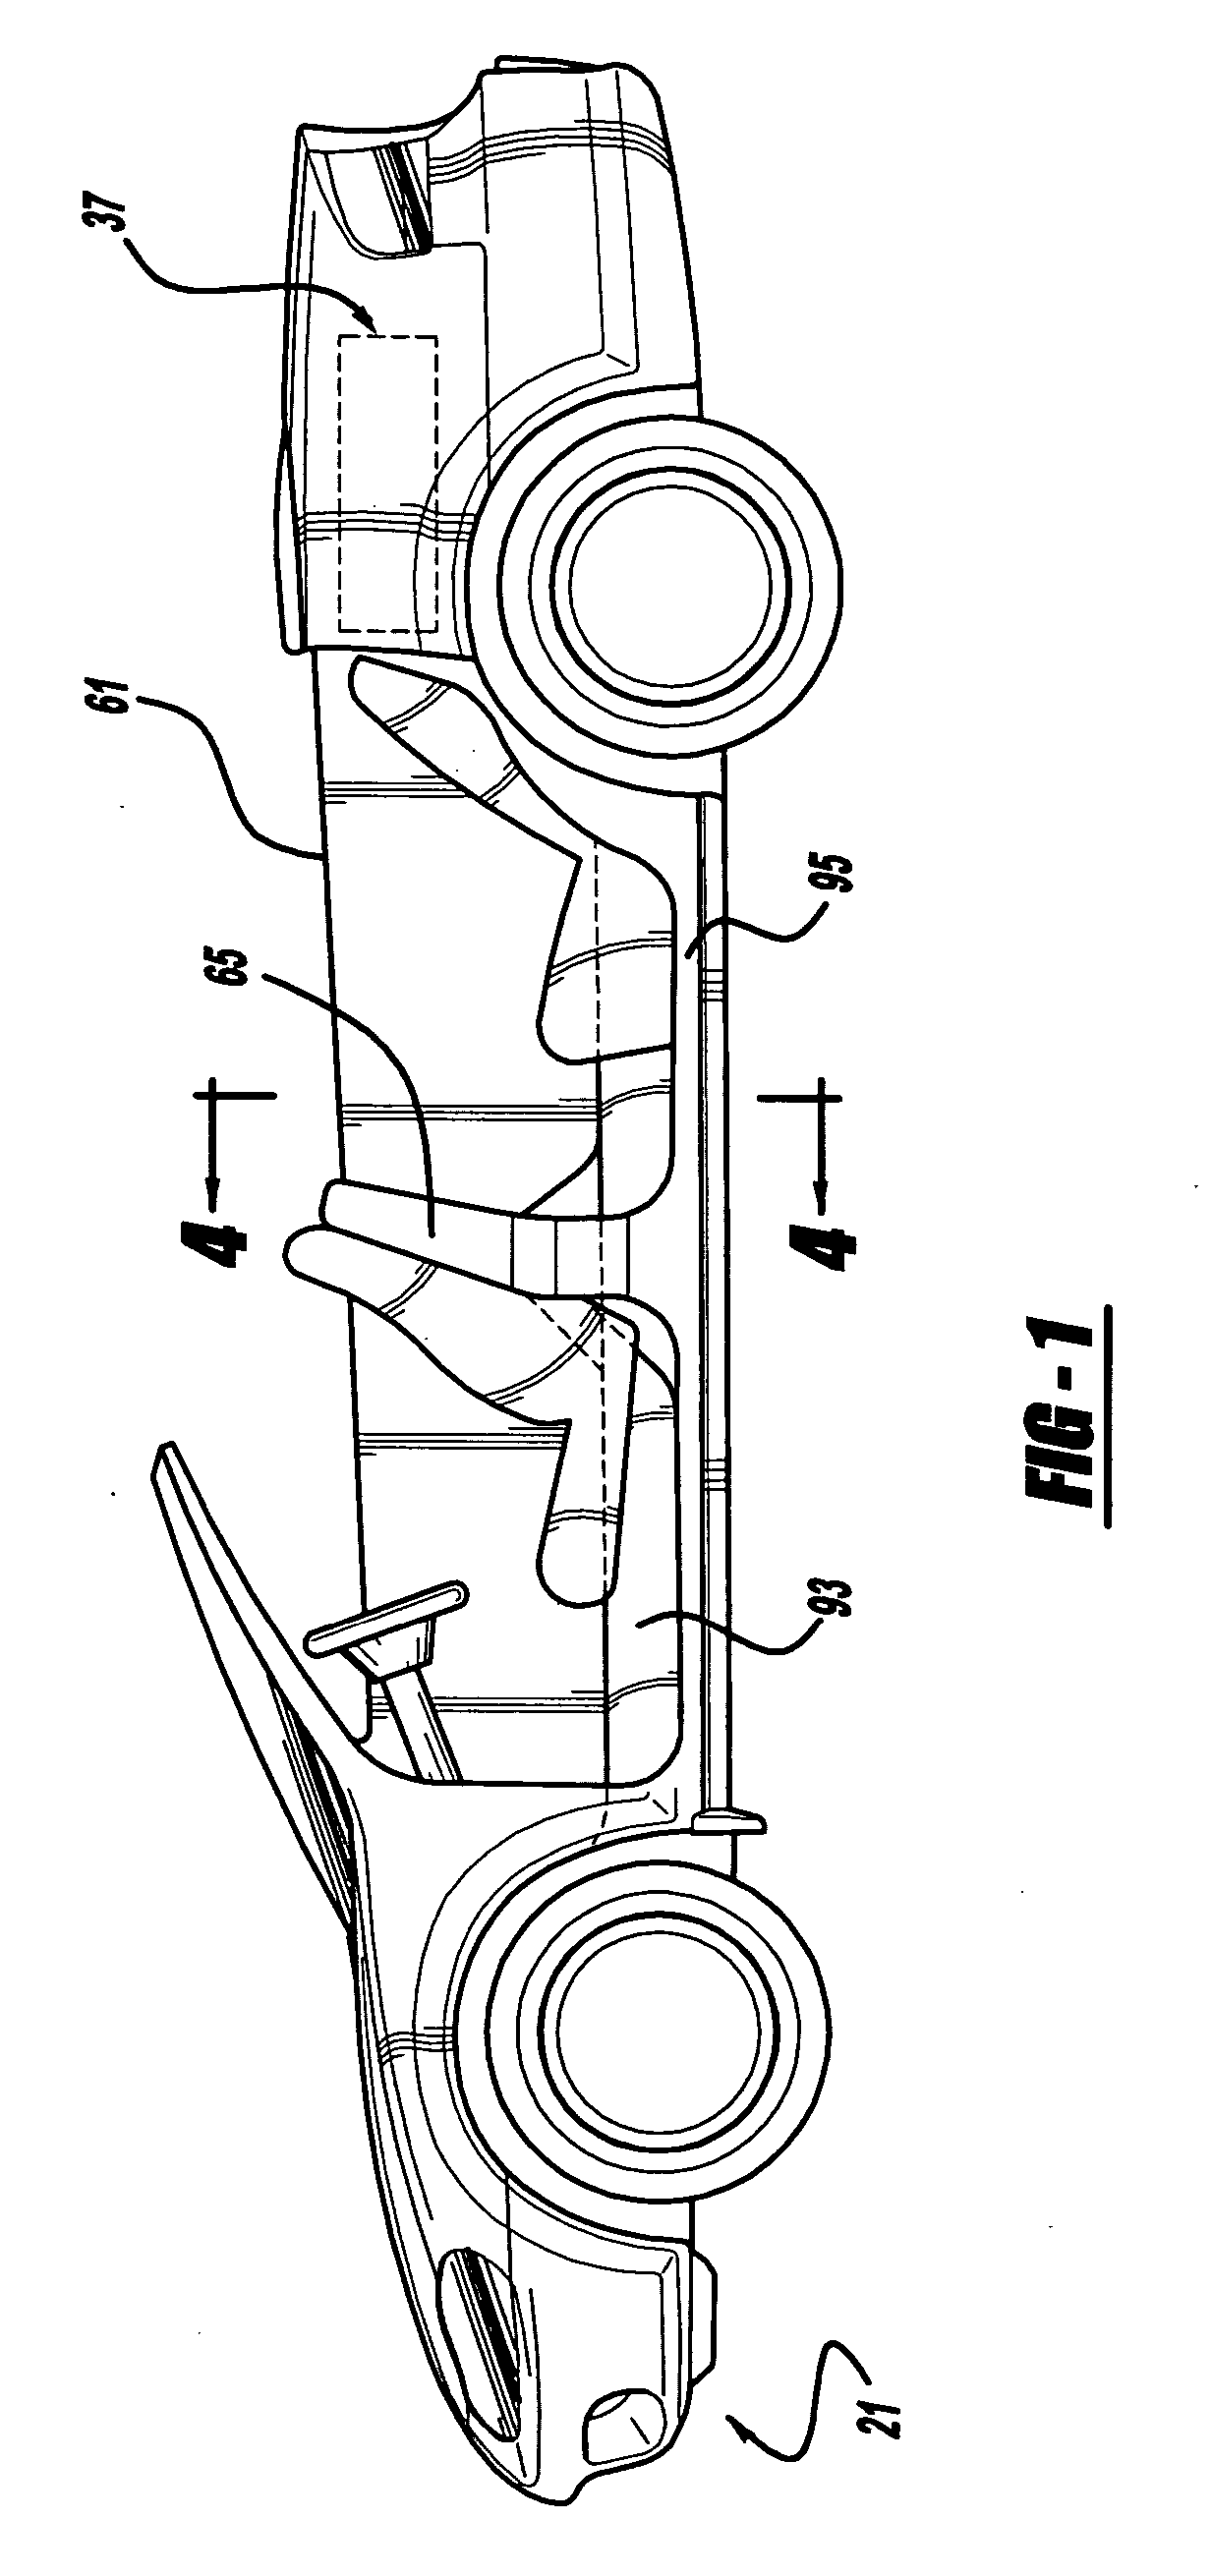 Structural system for a convertible automotive vehicle